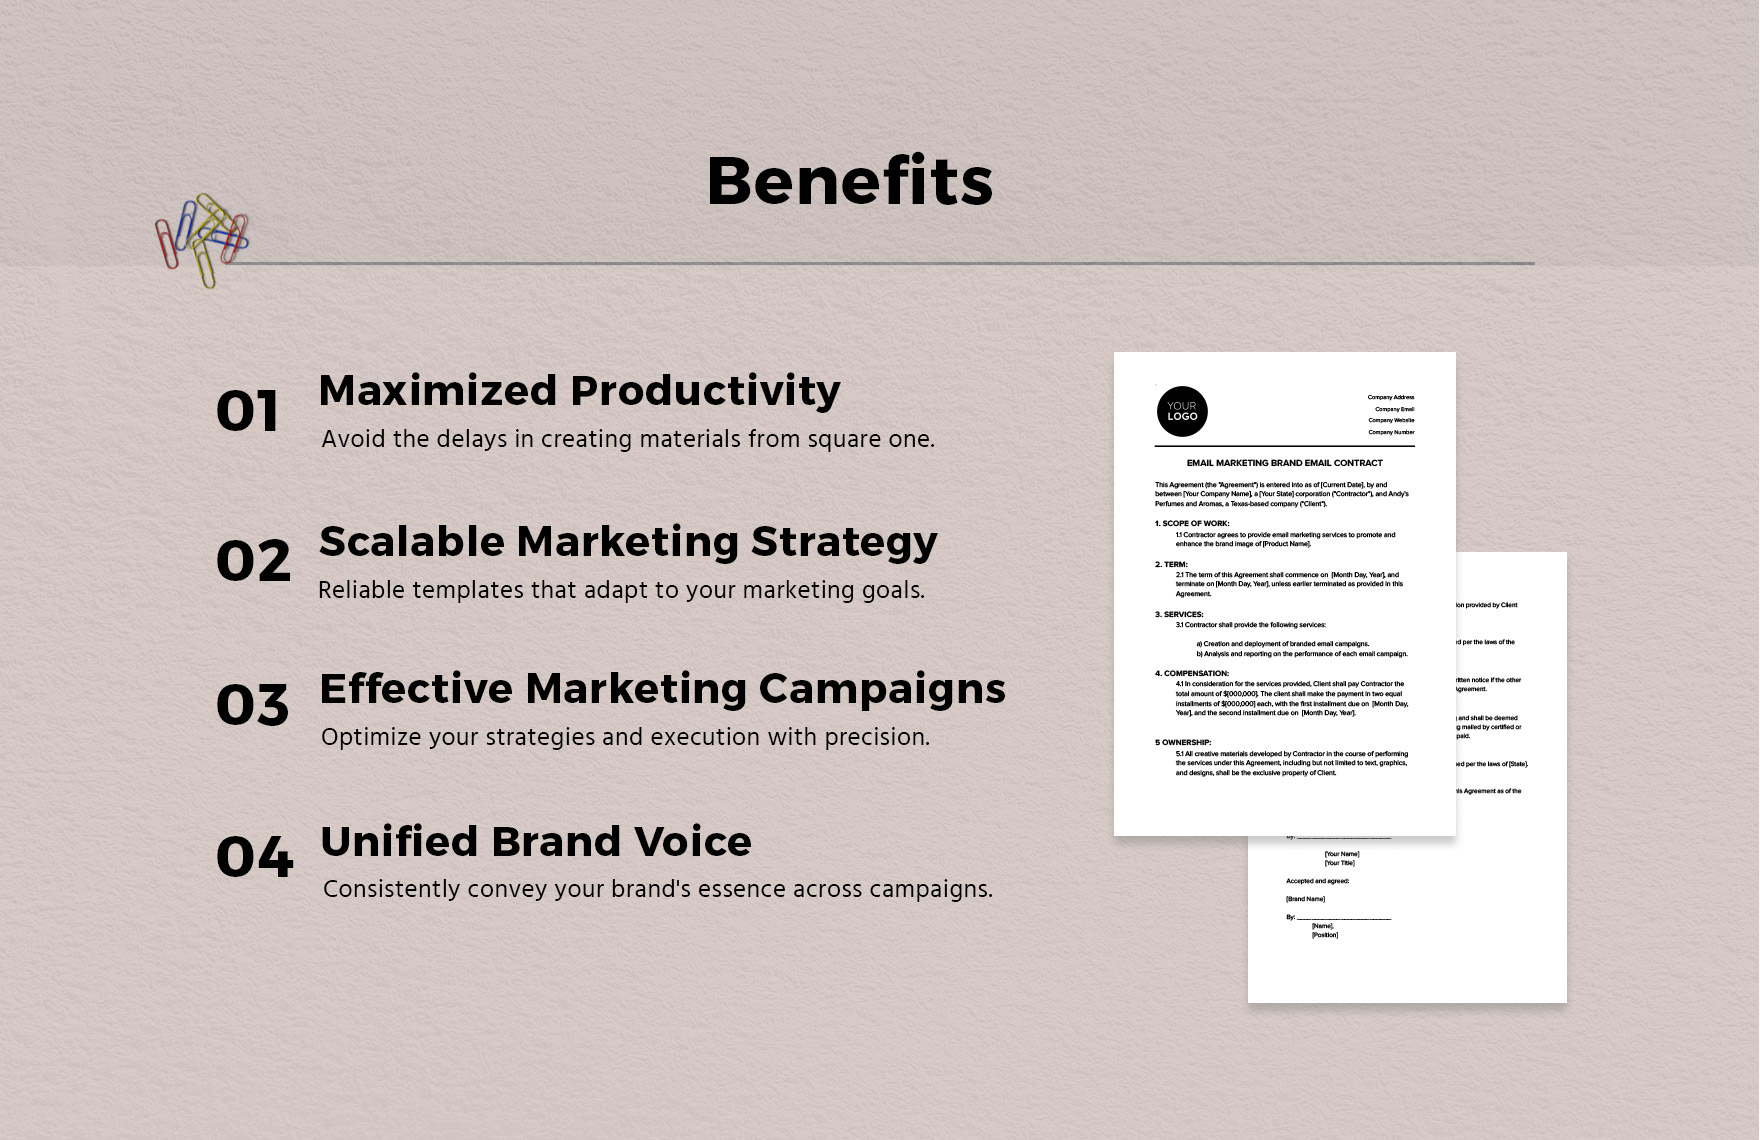 Email Marketing Brand Email Contract Template